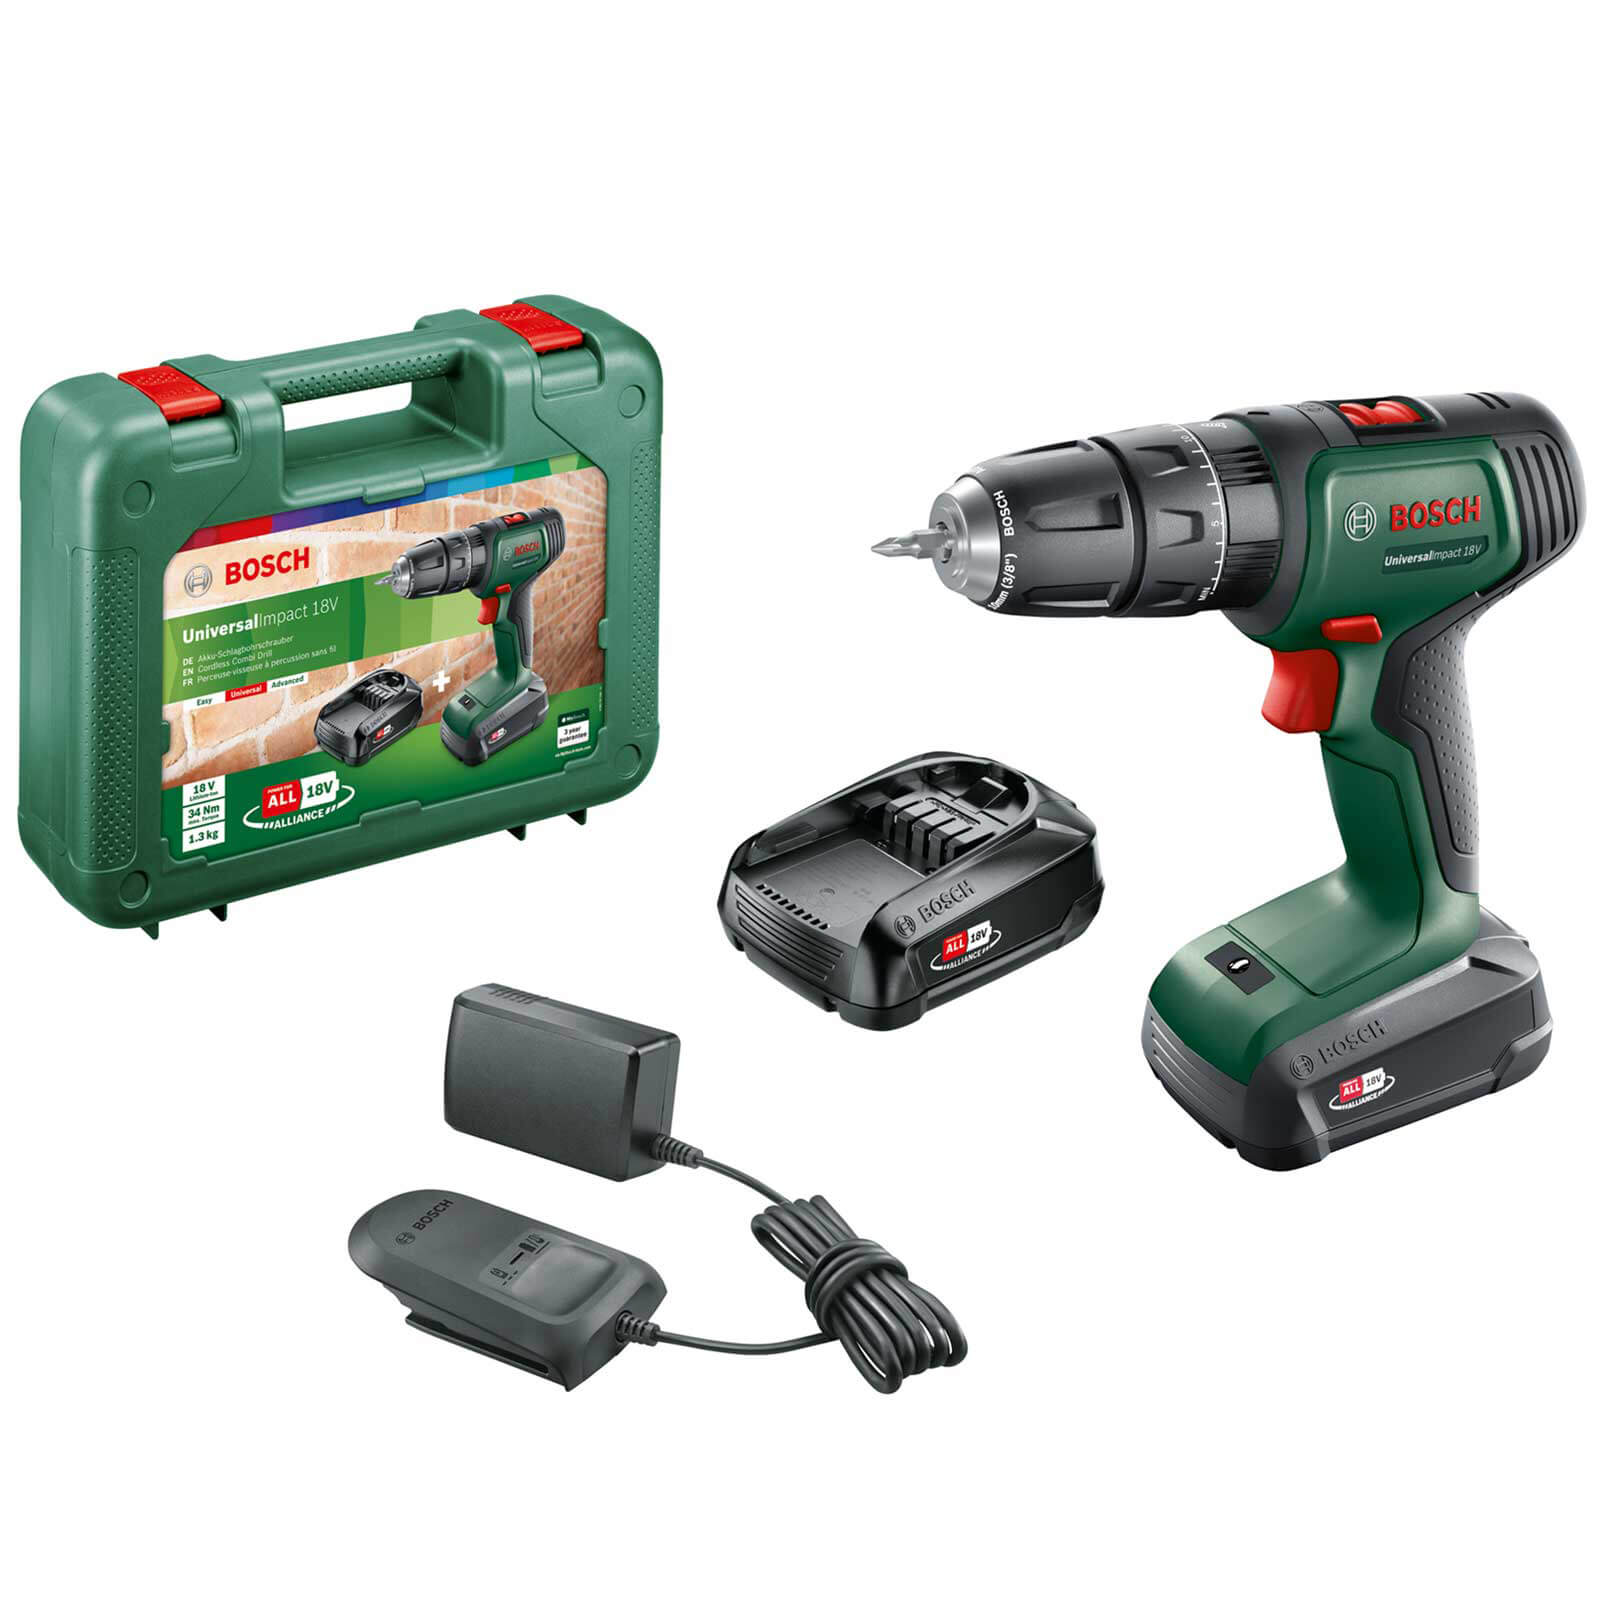 Image of Bosch UNIVERSALIMPACT 18v Cordless Combi Drill 2 x 1.5ah Li-ion Charger Case